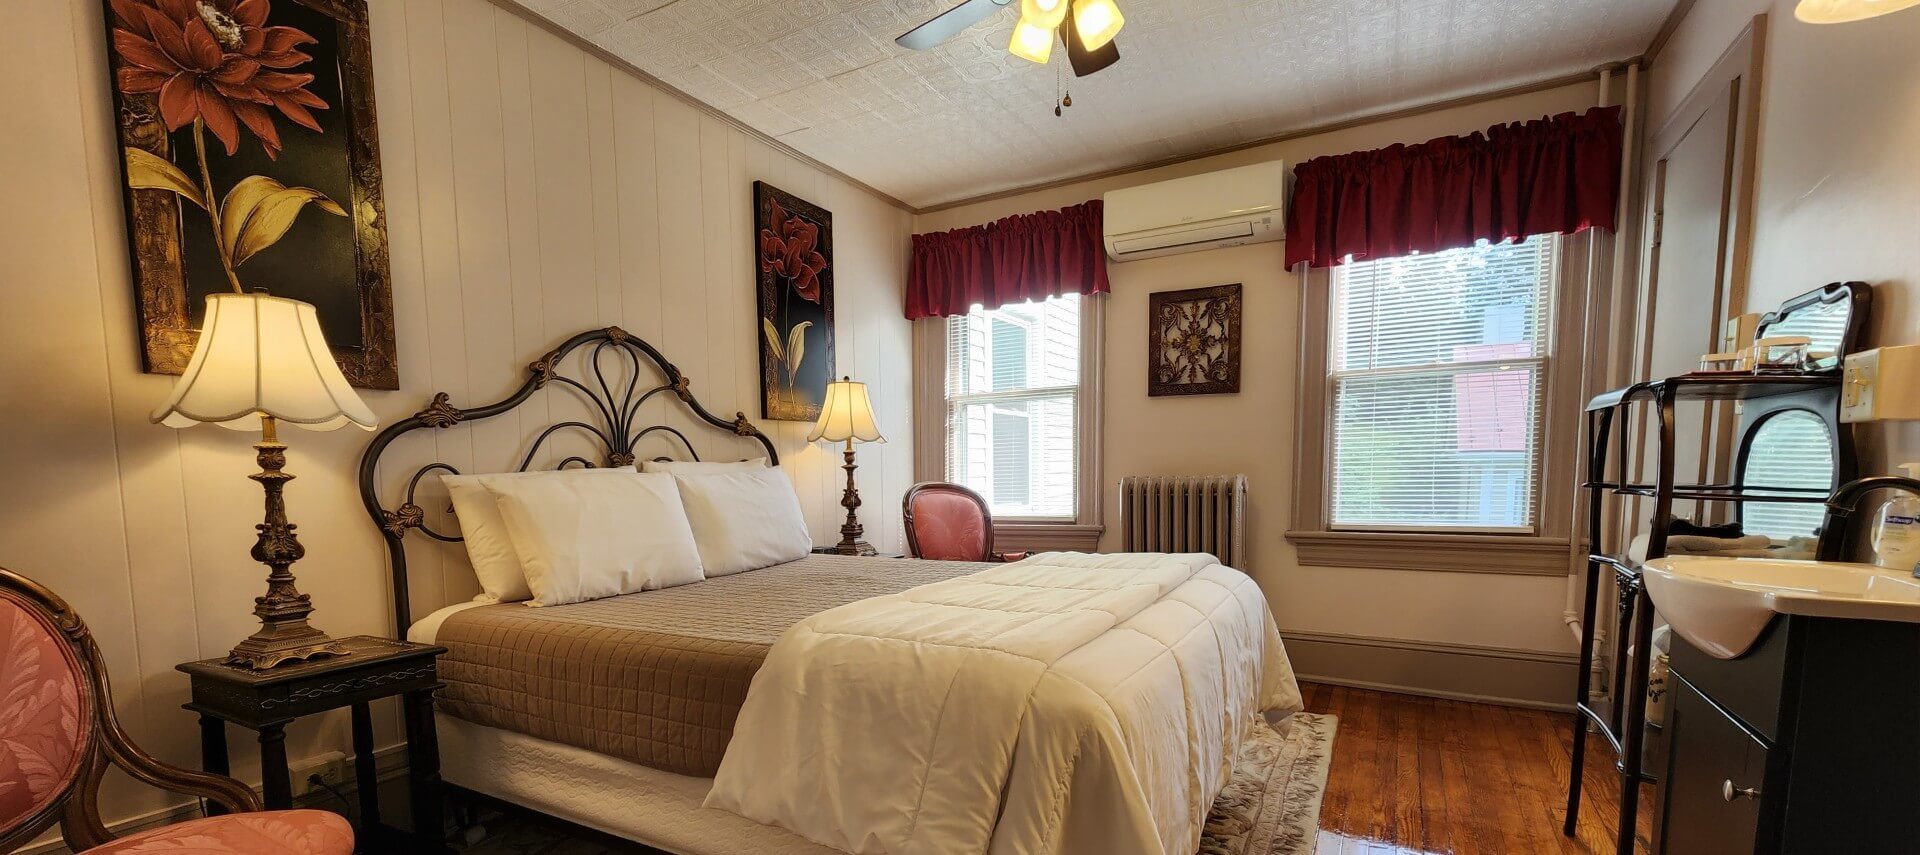 Bedroom with queen bed, wrought iron headboard, antique furnishings and two bright windows